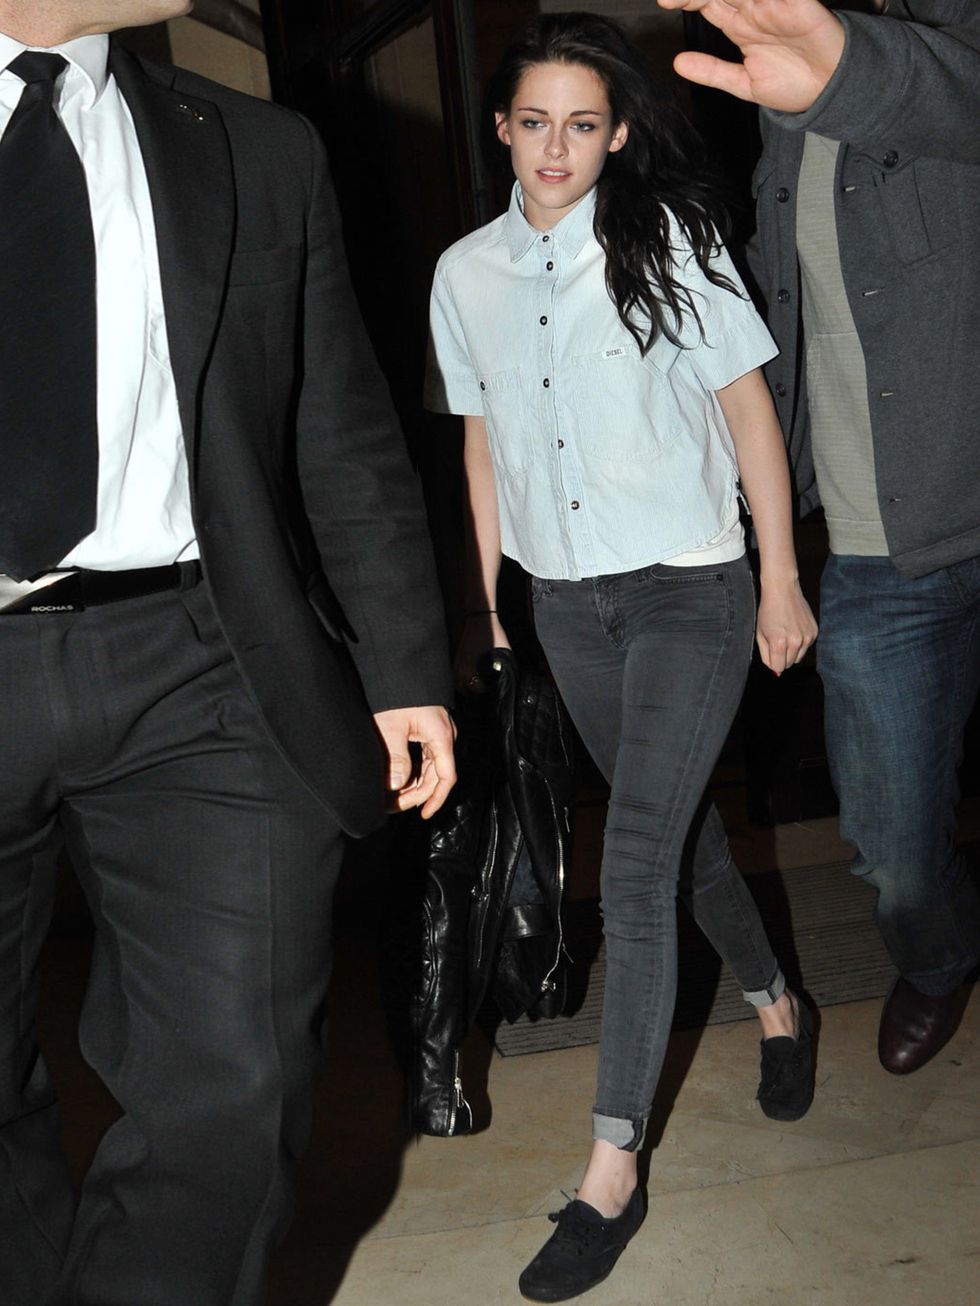 <p>Kristen Stewart wearing Diesel. The actress is in a pale blue button down shirt. The actress is our June cover star.</p>